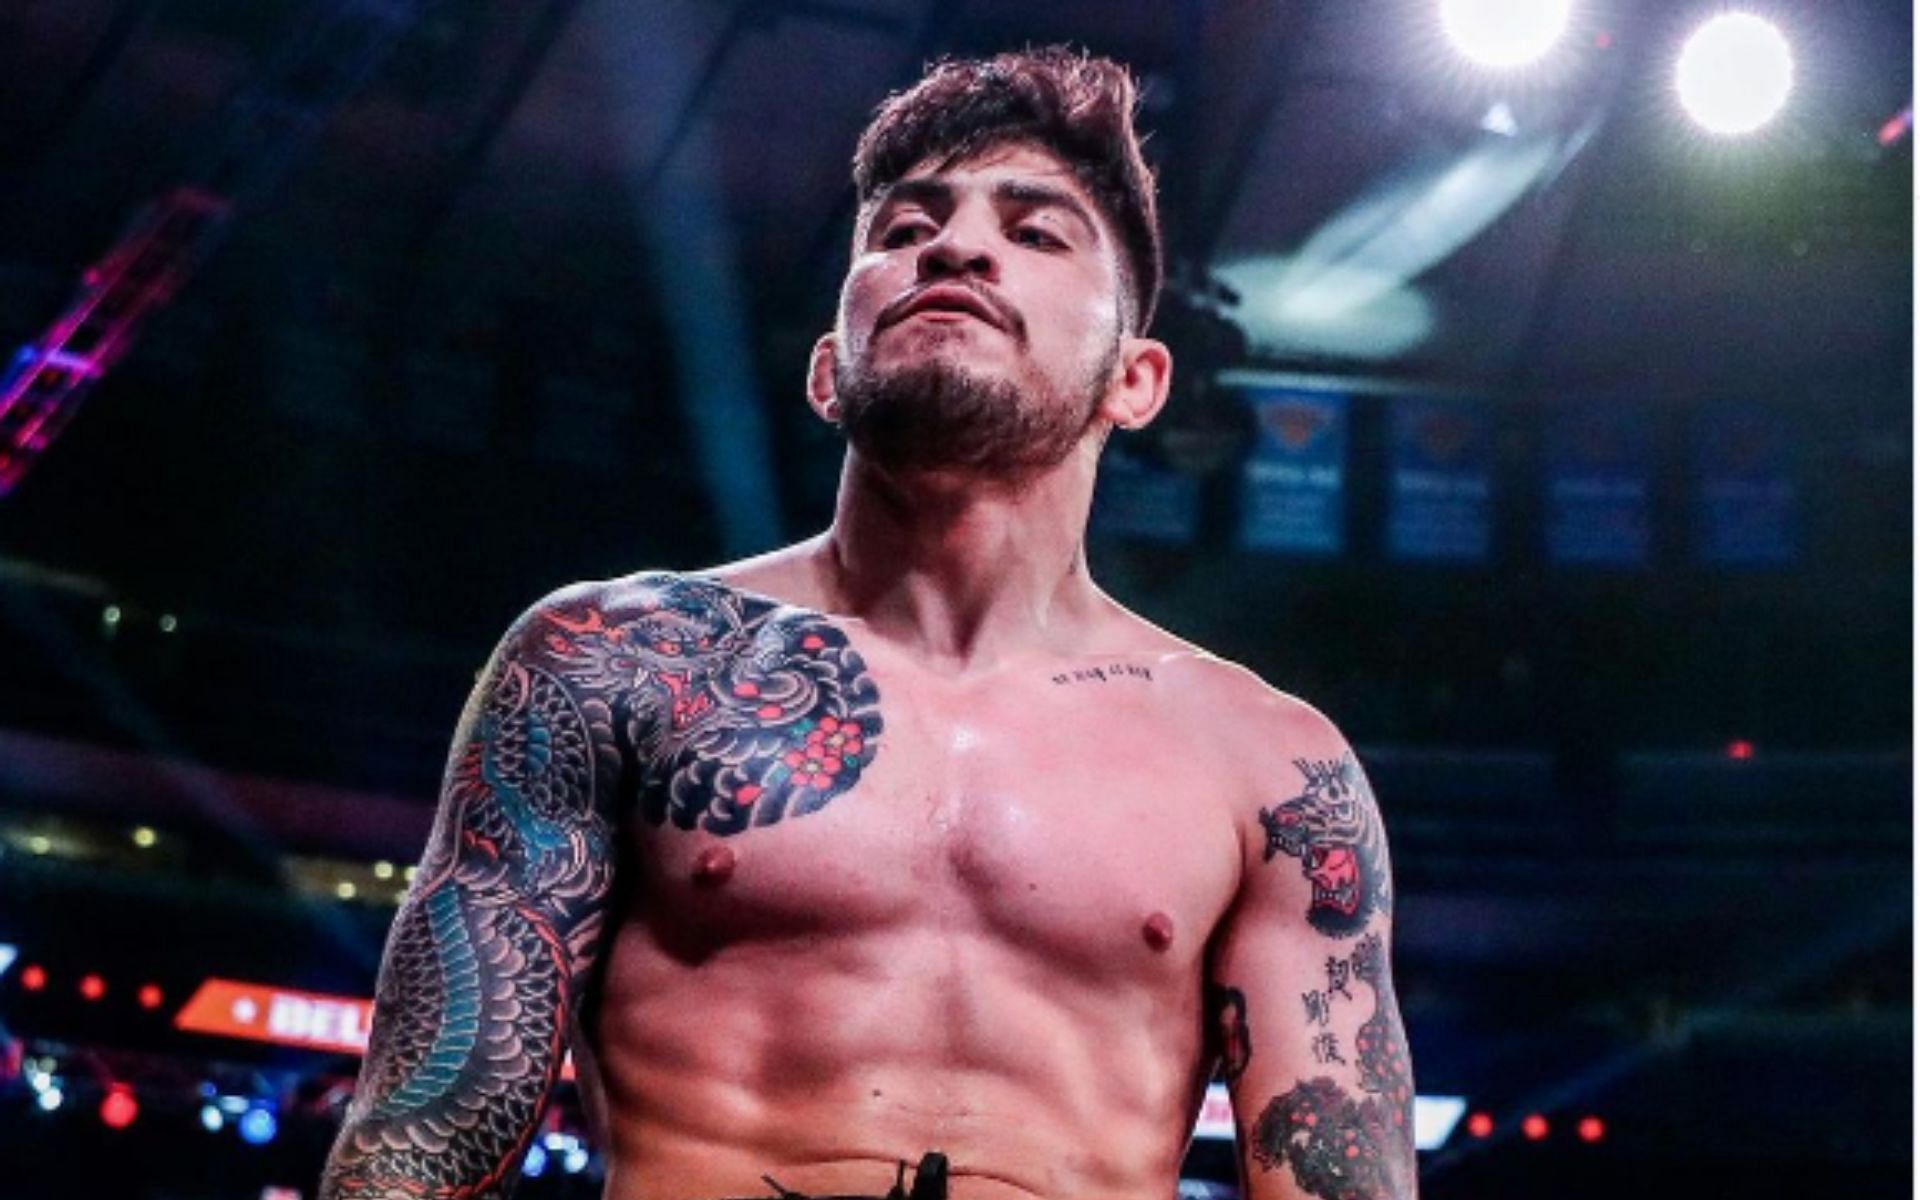 28-year-old American mixed martial artist Dillon Danis (Image Credit: via @dillondanis on Instagram)